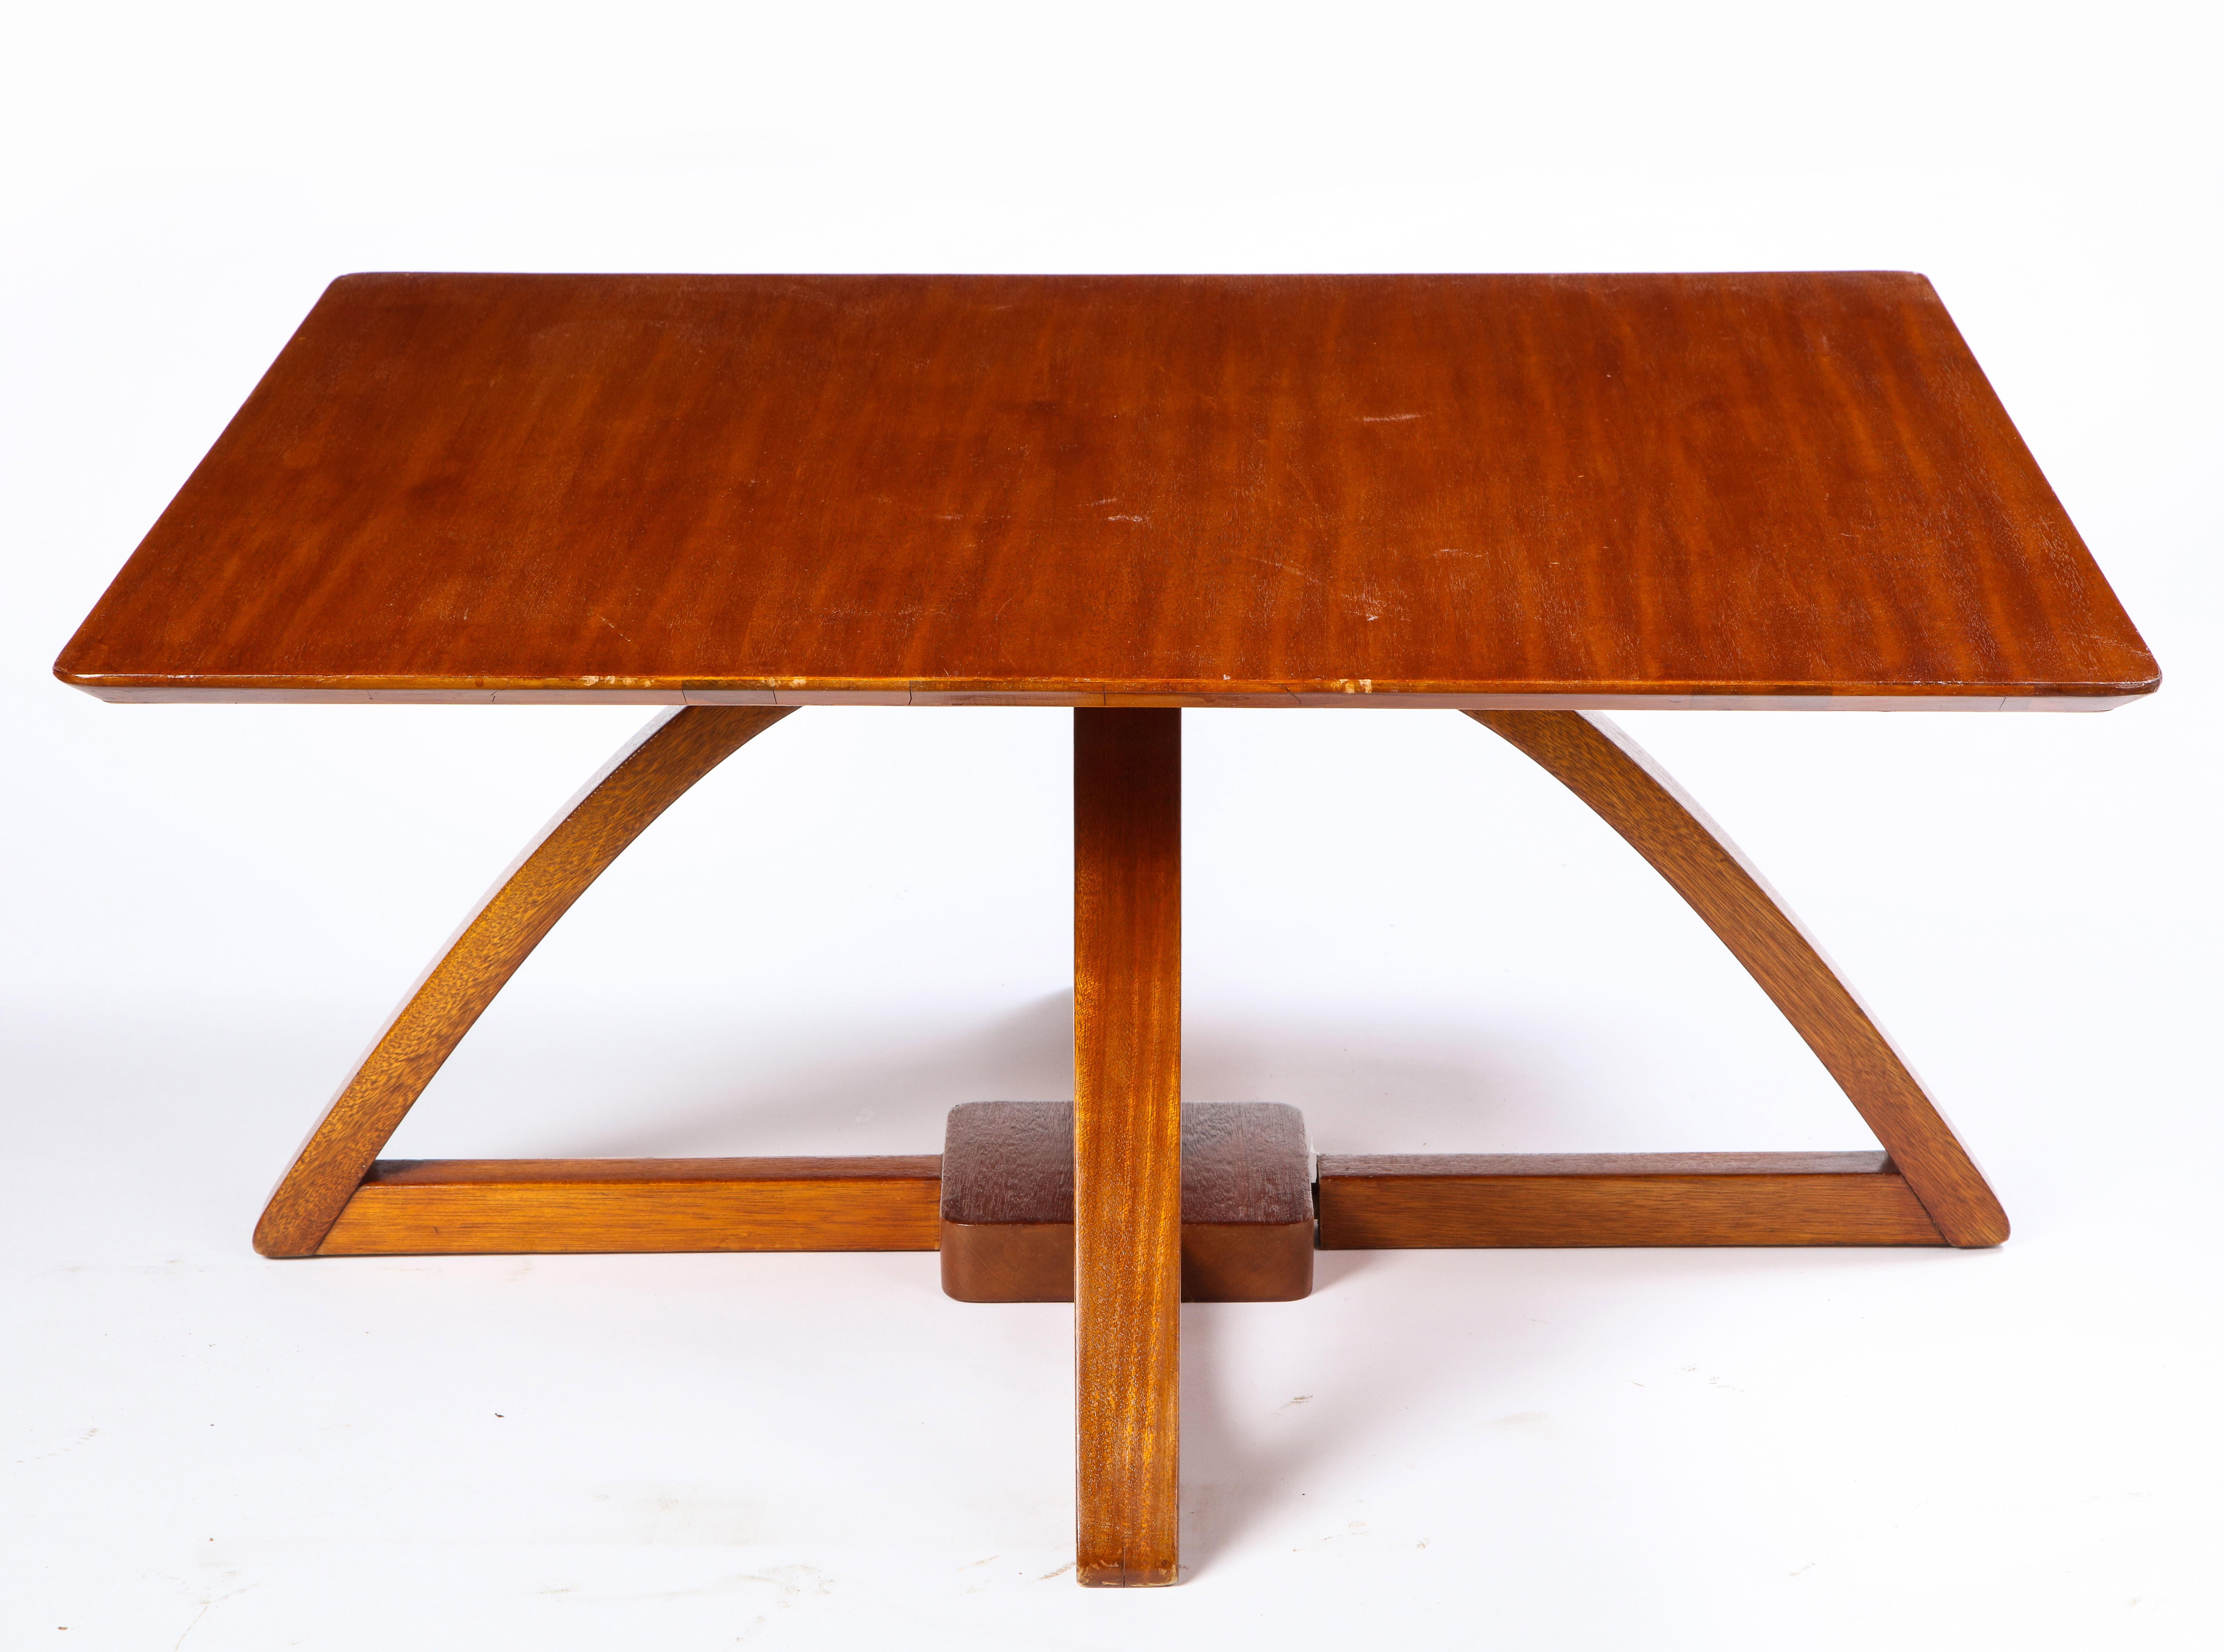 A modern mahogany low table, with adjustable height. Its square form and large legs make it a stable piece, which can be used as a low dining table but most typically a lowboy table. This table was custom made in South Africa. With its clean look,